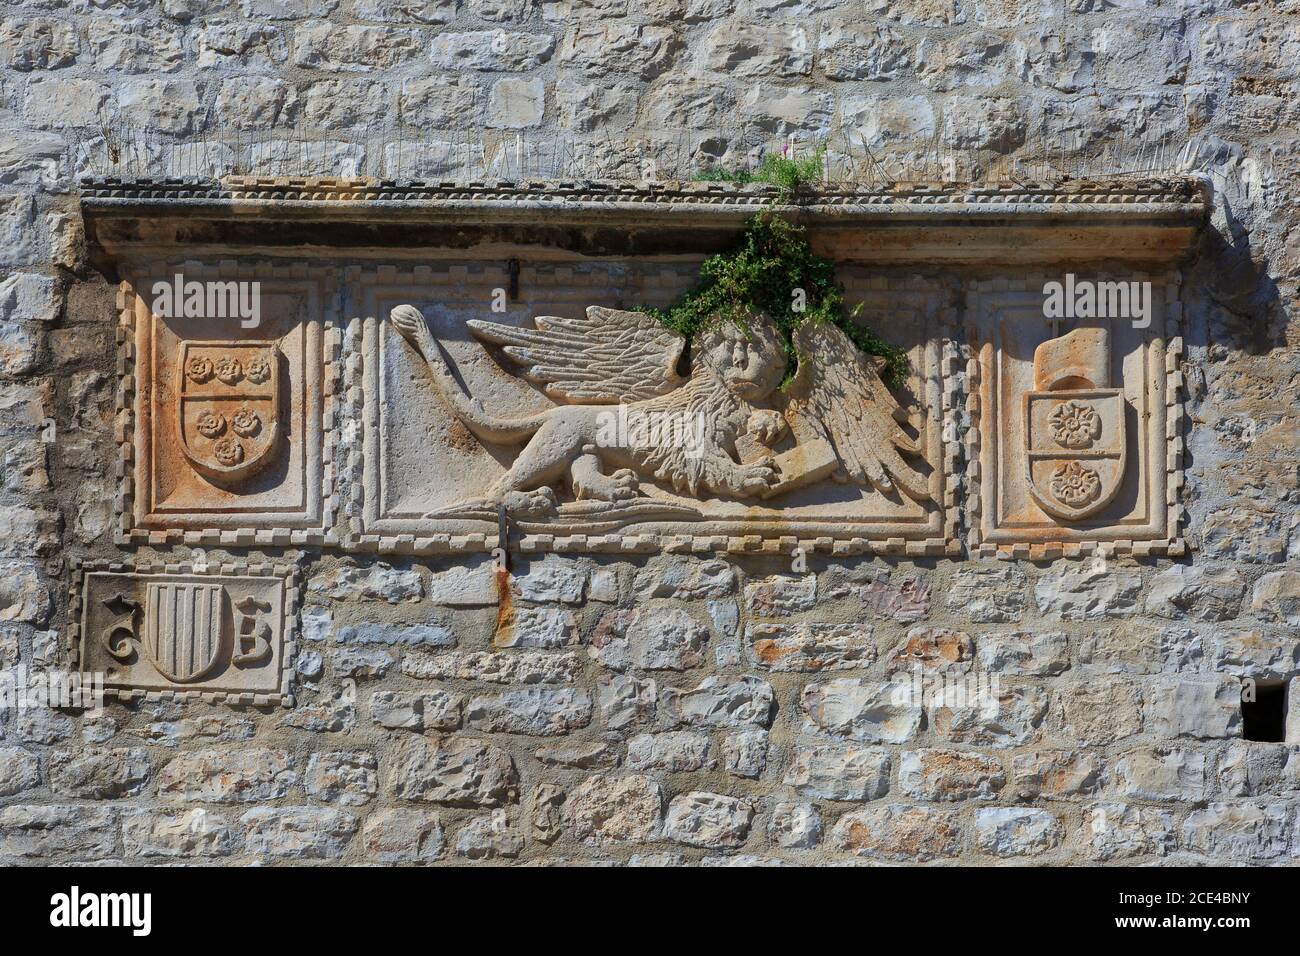 Close-up of the Venetian lion of Saint Mark on the town gate in the picturesque town of Korcula (Dubrovnik-Neretva County), Croatia Stock Photo